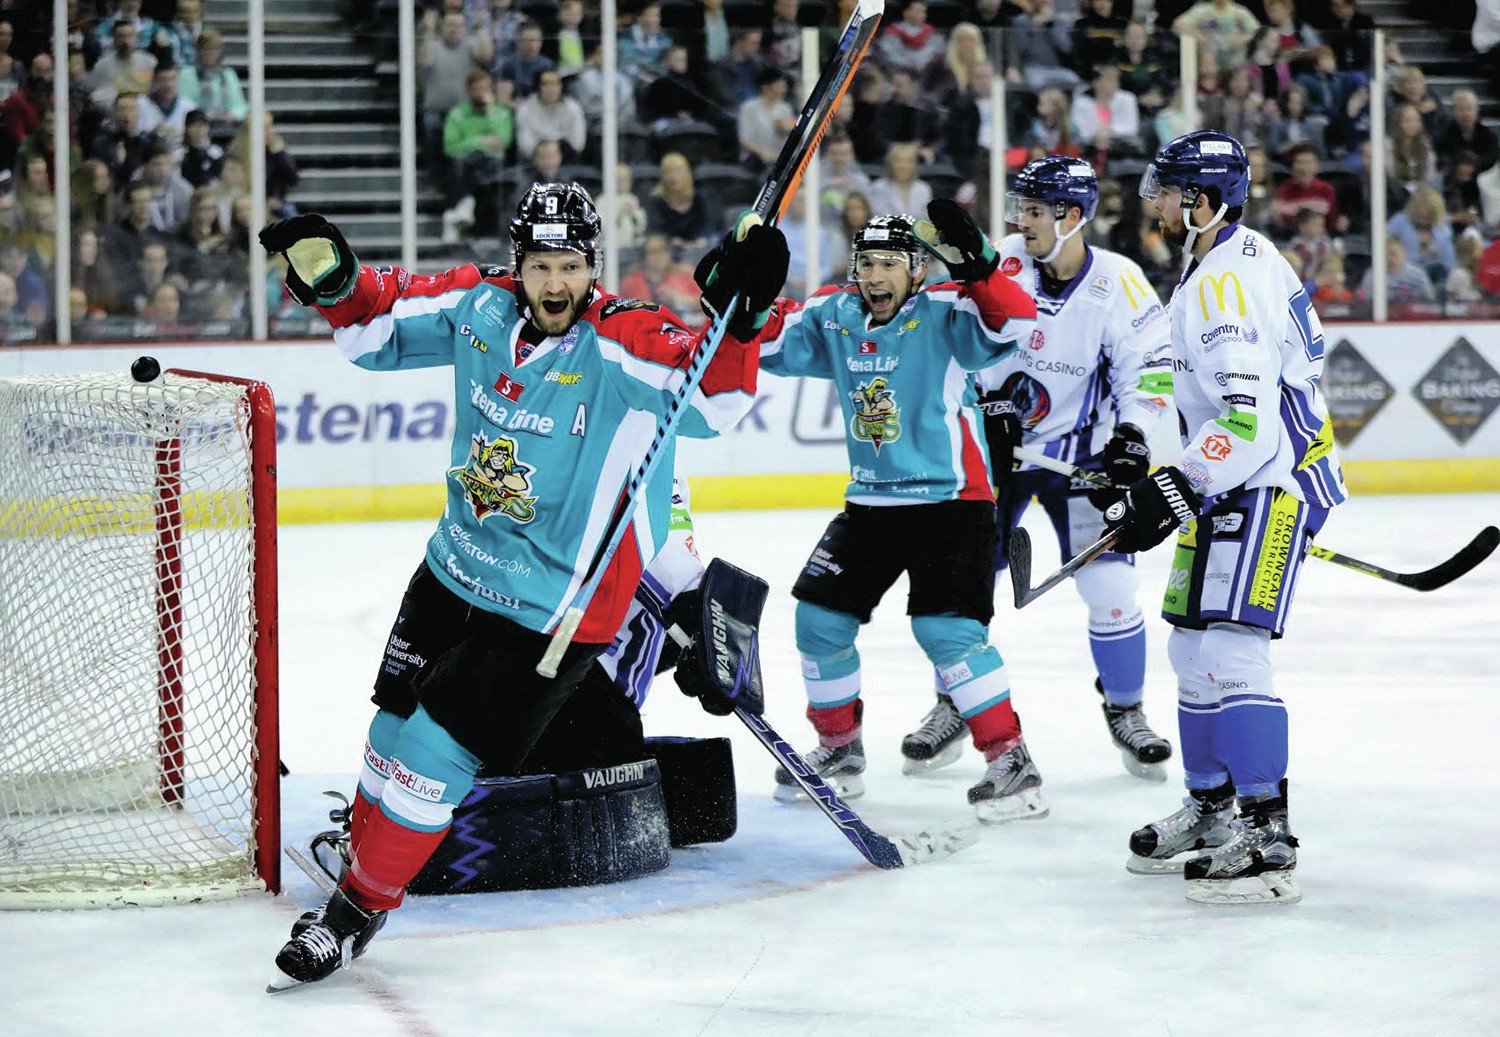 FAMILIAR FACE - Former Red Deer Rebel Jim Vandermeer celebrates scoring against Coventry during an Elite Ice Hockey League game at the SSE Arena